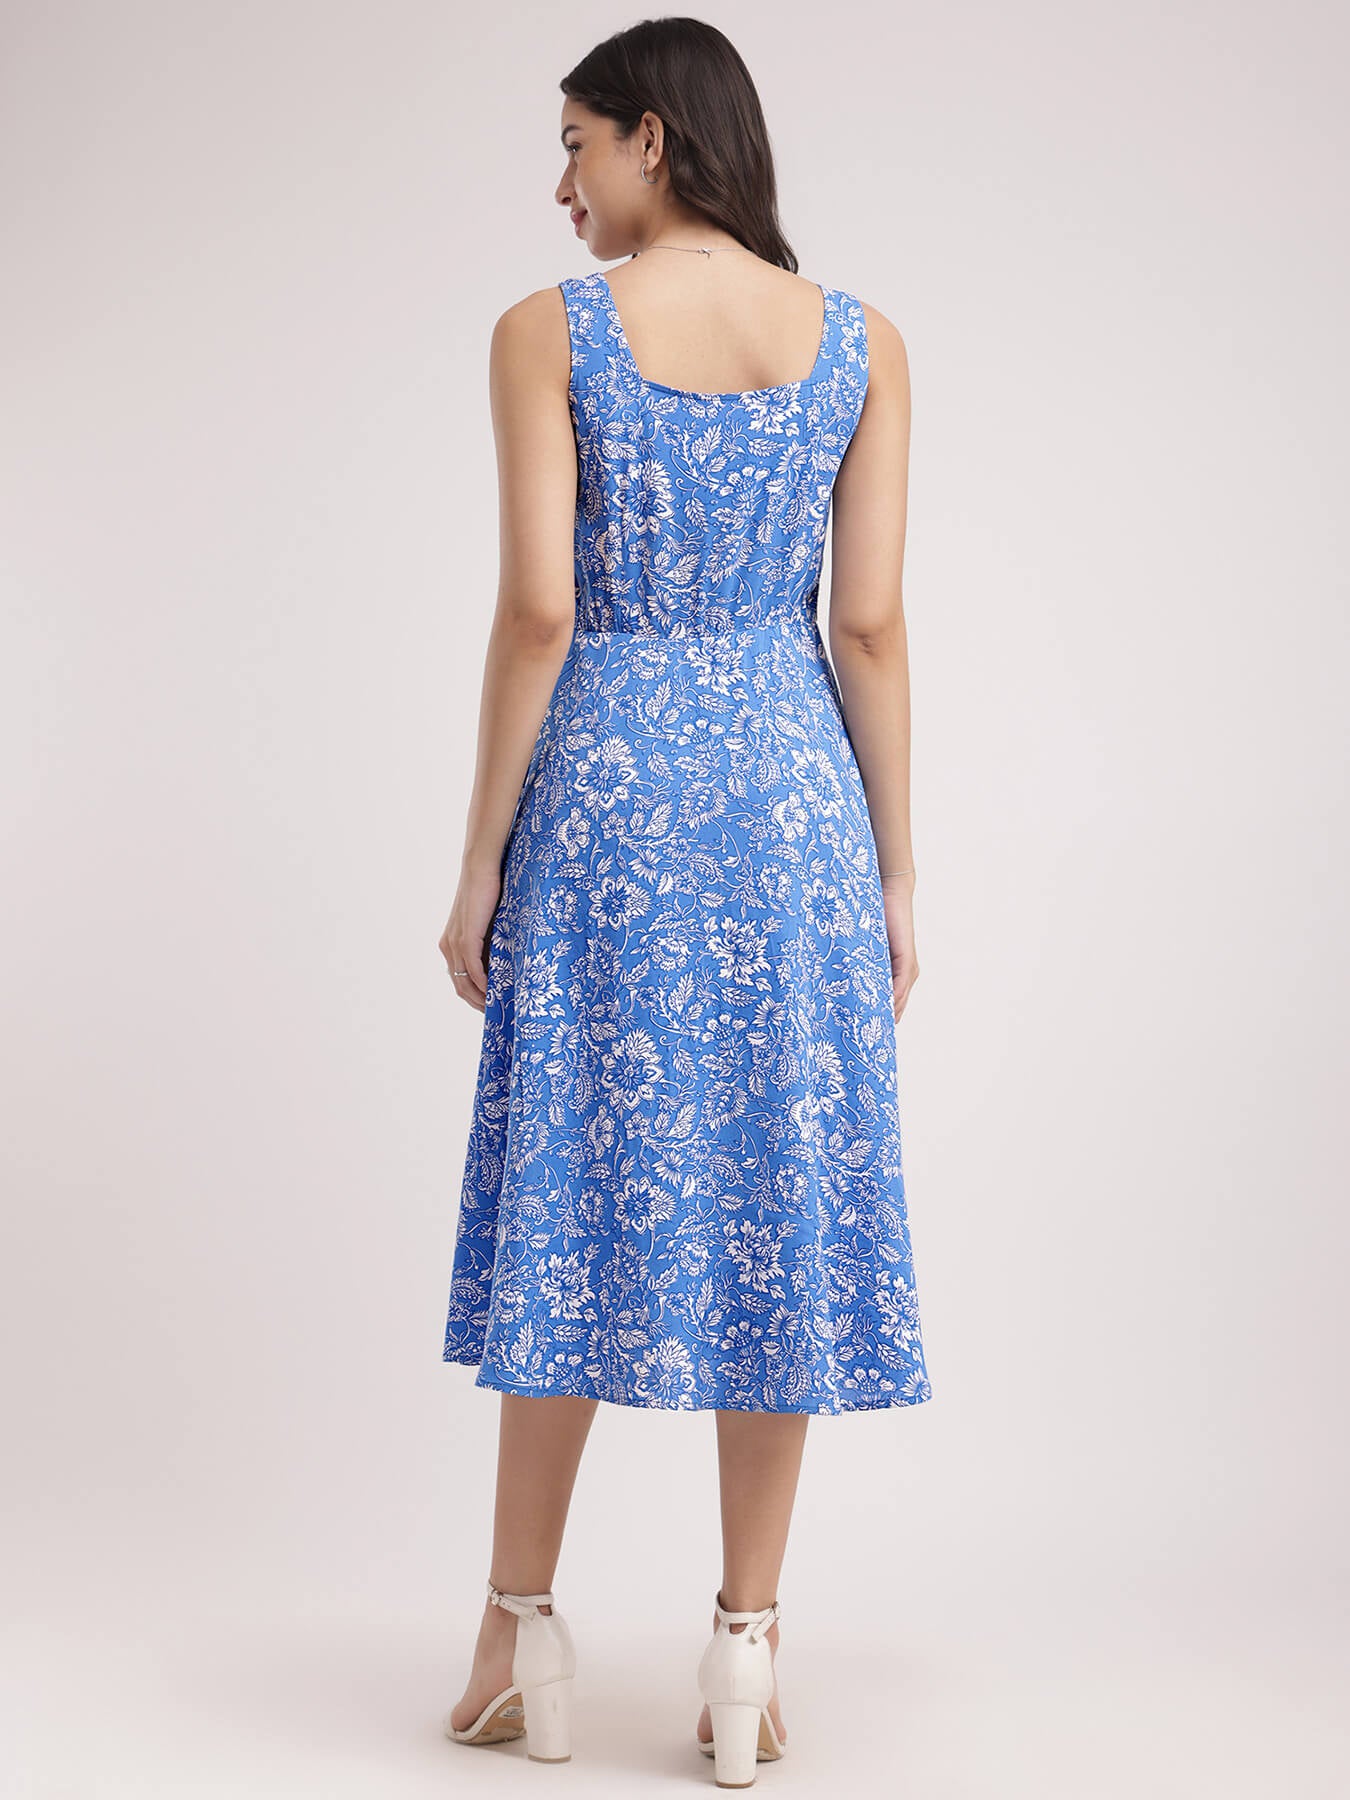 Fit And Flare Floral Dress - Blue And White